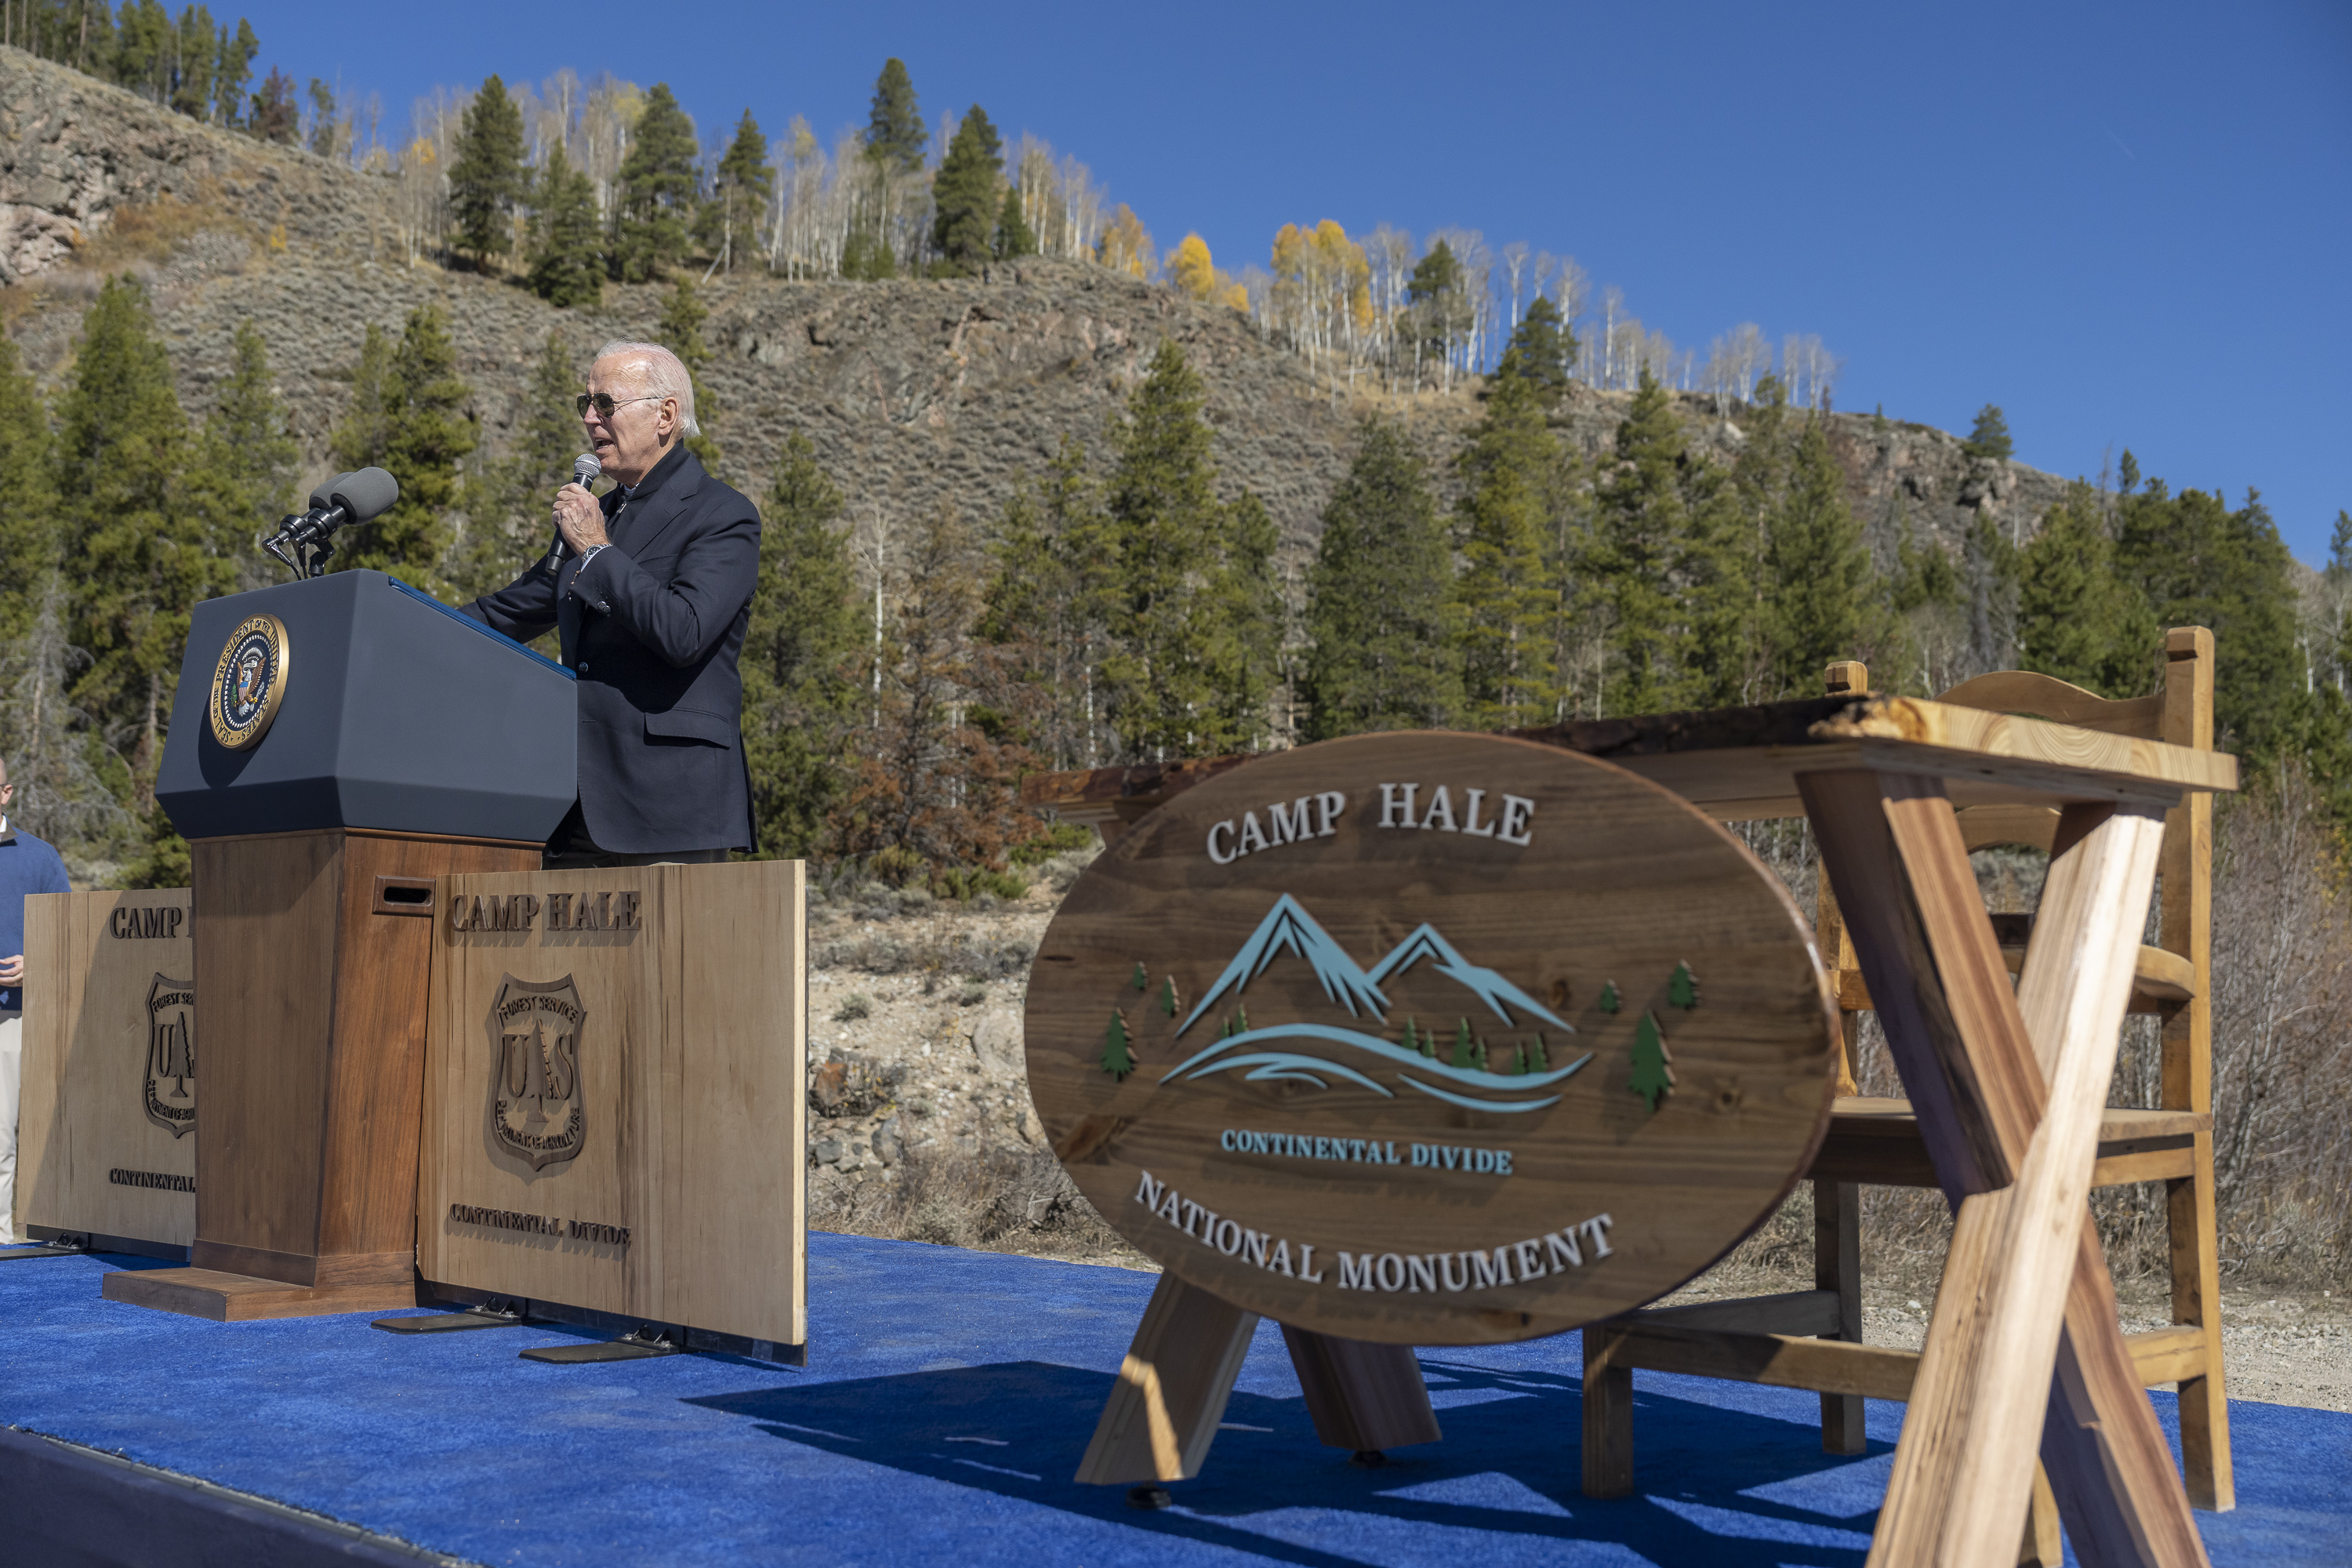 President Biden delivers remarks before signing a proclamation establishing the Camp Hale-Continental Divide National Monument, Oct. 12, 2022, at Camp Hale in Leadville, CO. (Official White House Photo by Adam Schultz)